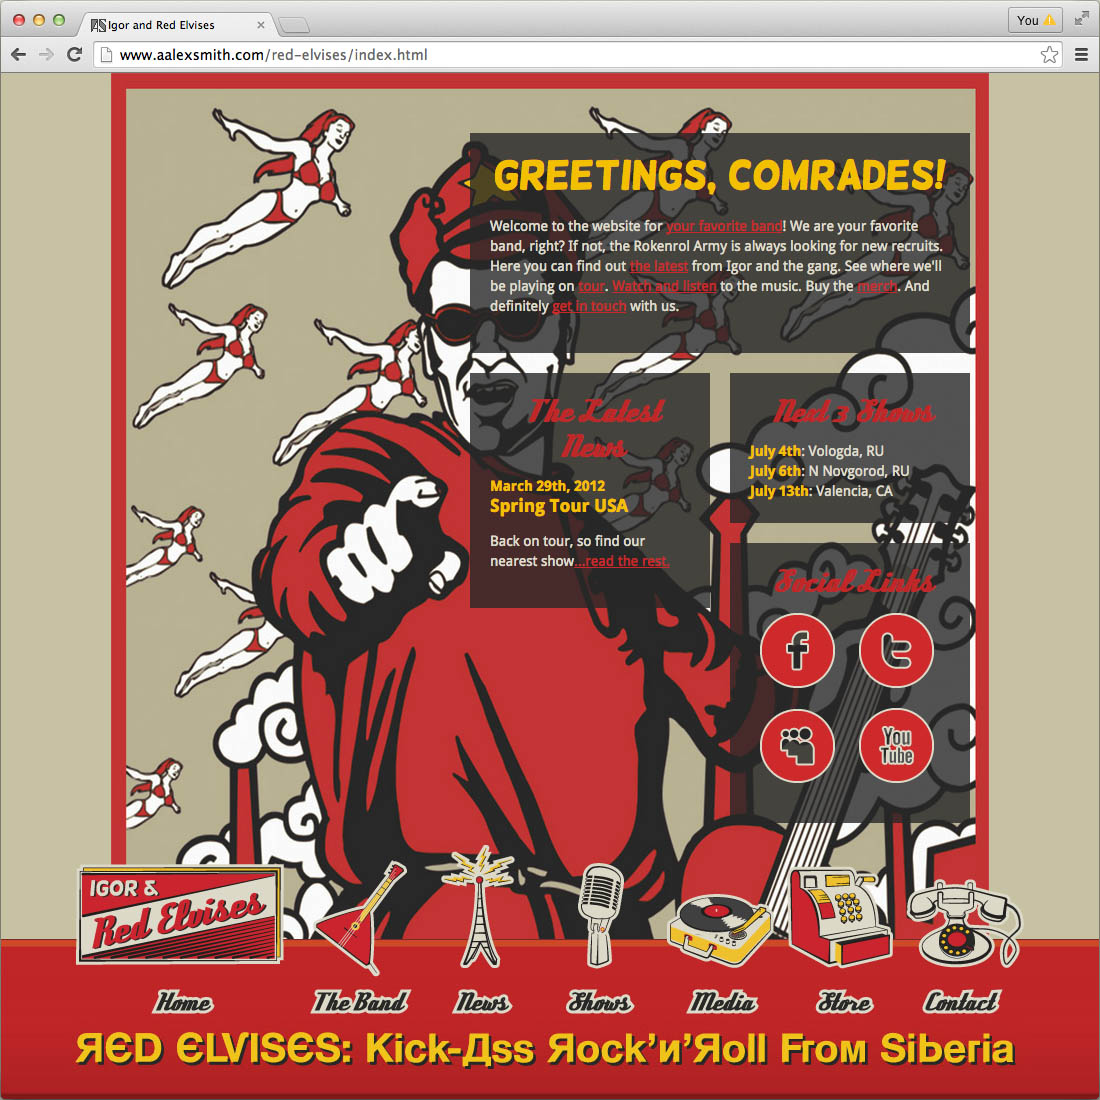 Red Elvises band website concept, home page